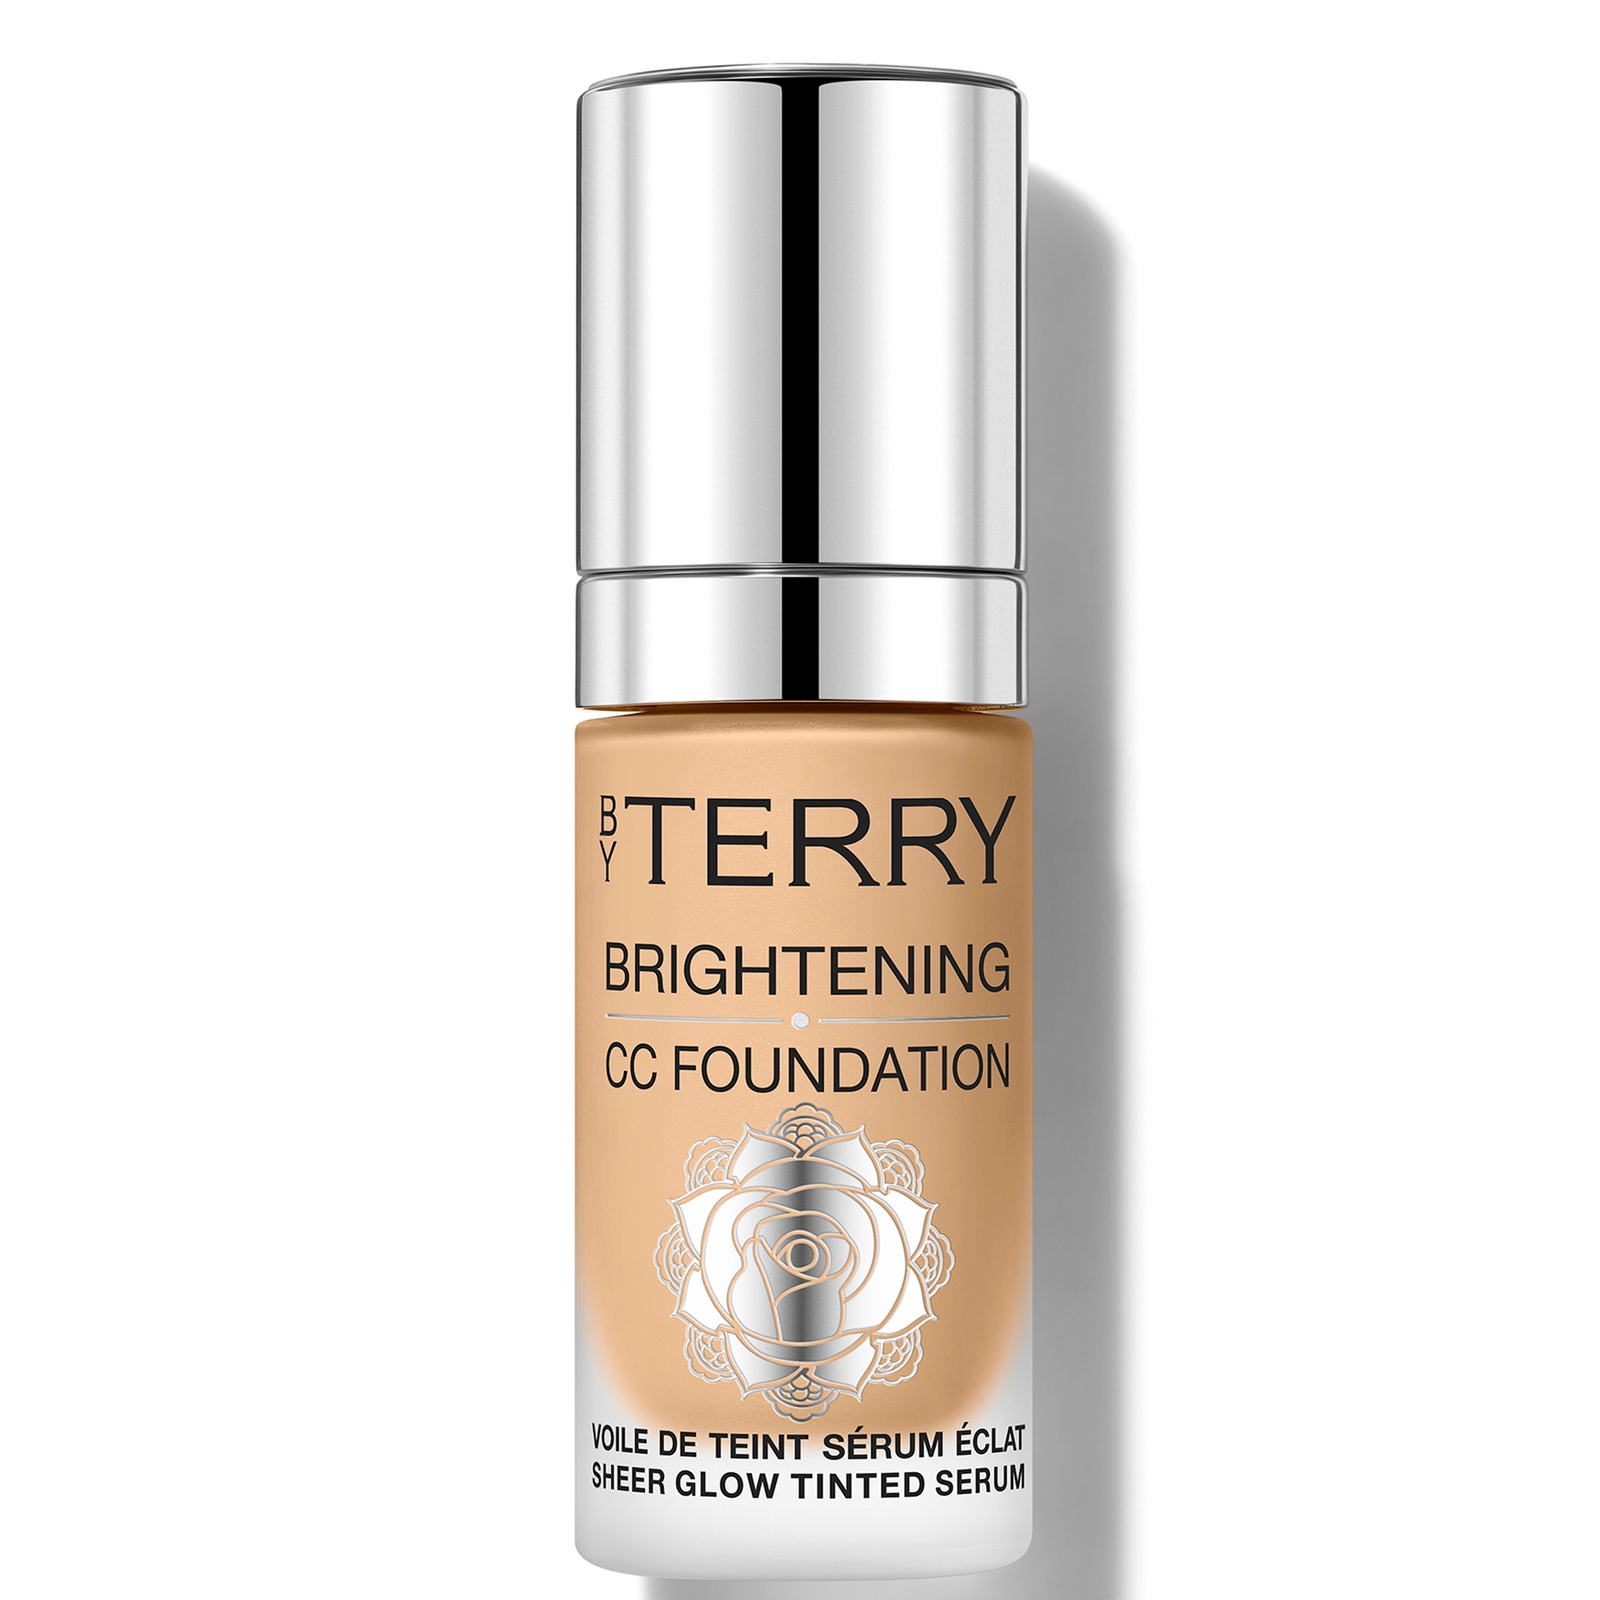 By Terry Brightening Cc Foundation 30ml (various Shades) - 5w - Medium Tan Warm In White